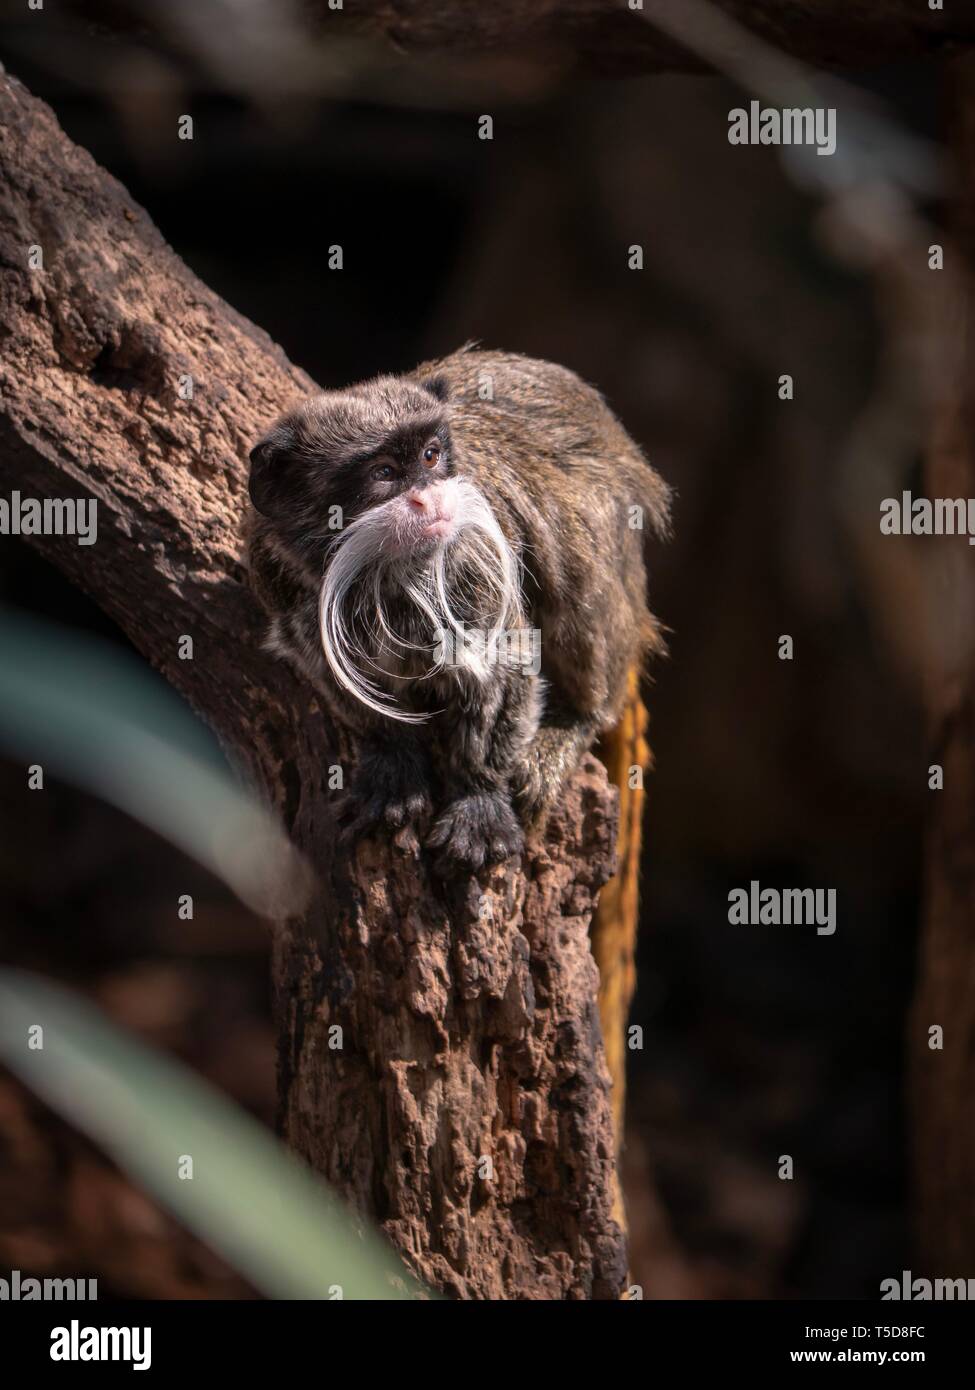 A bearded emperor tamarin crouched in a spot of sunlight on a branch Stock Photo